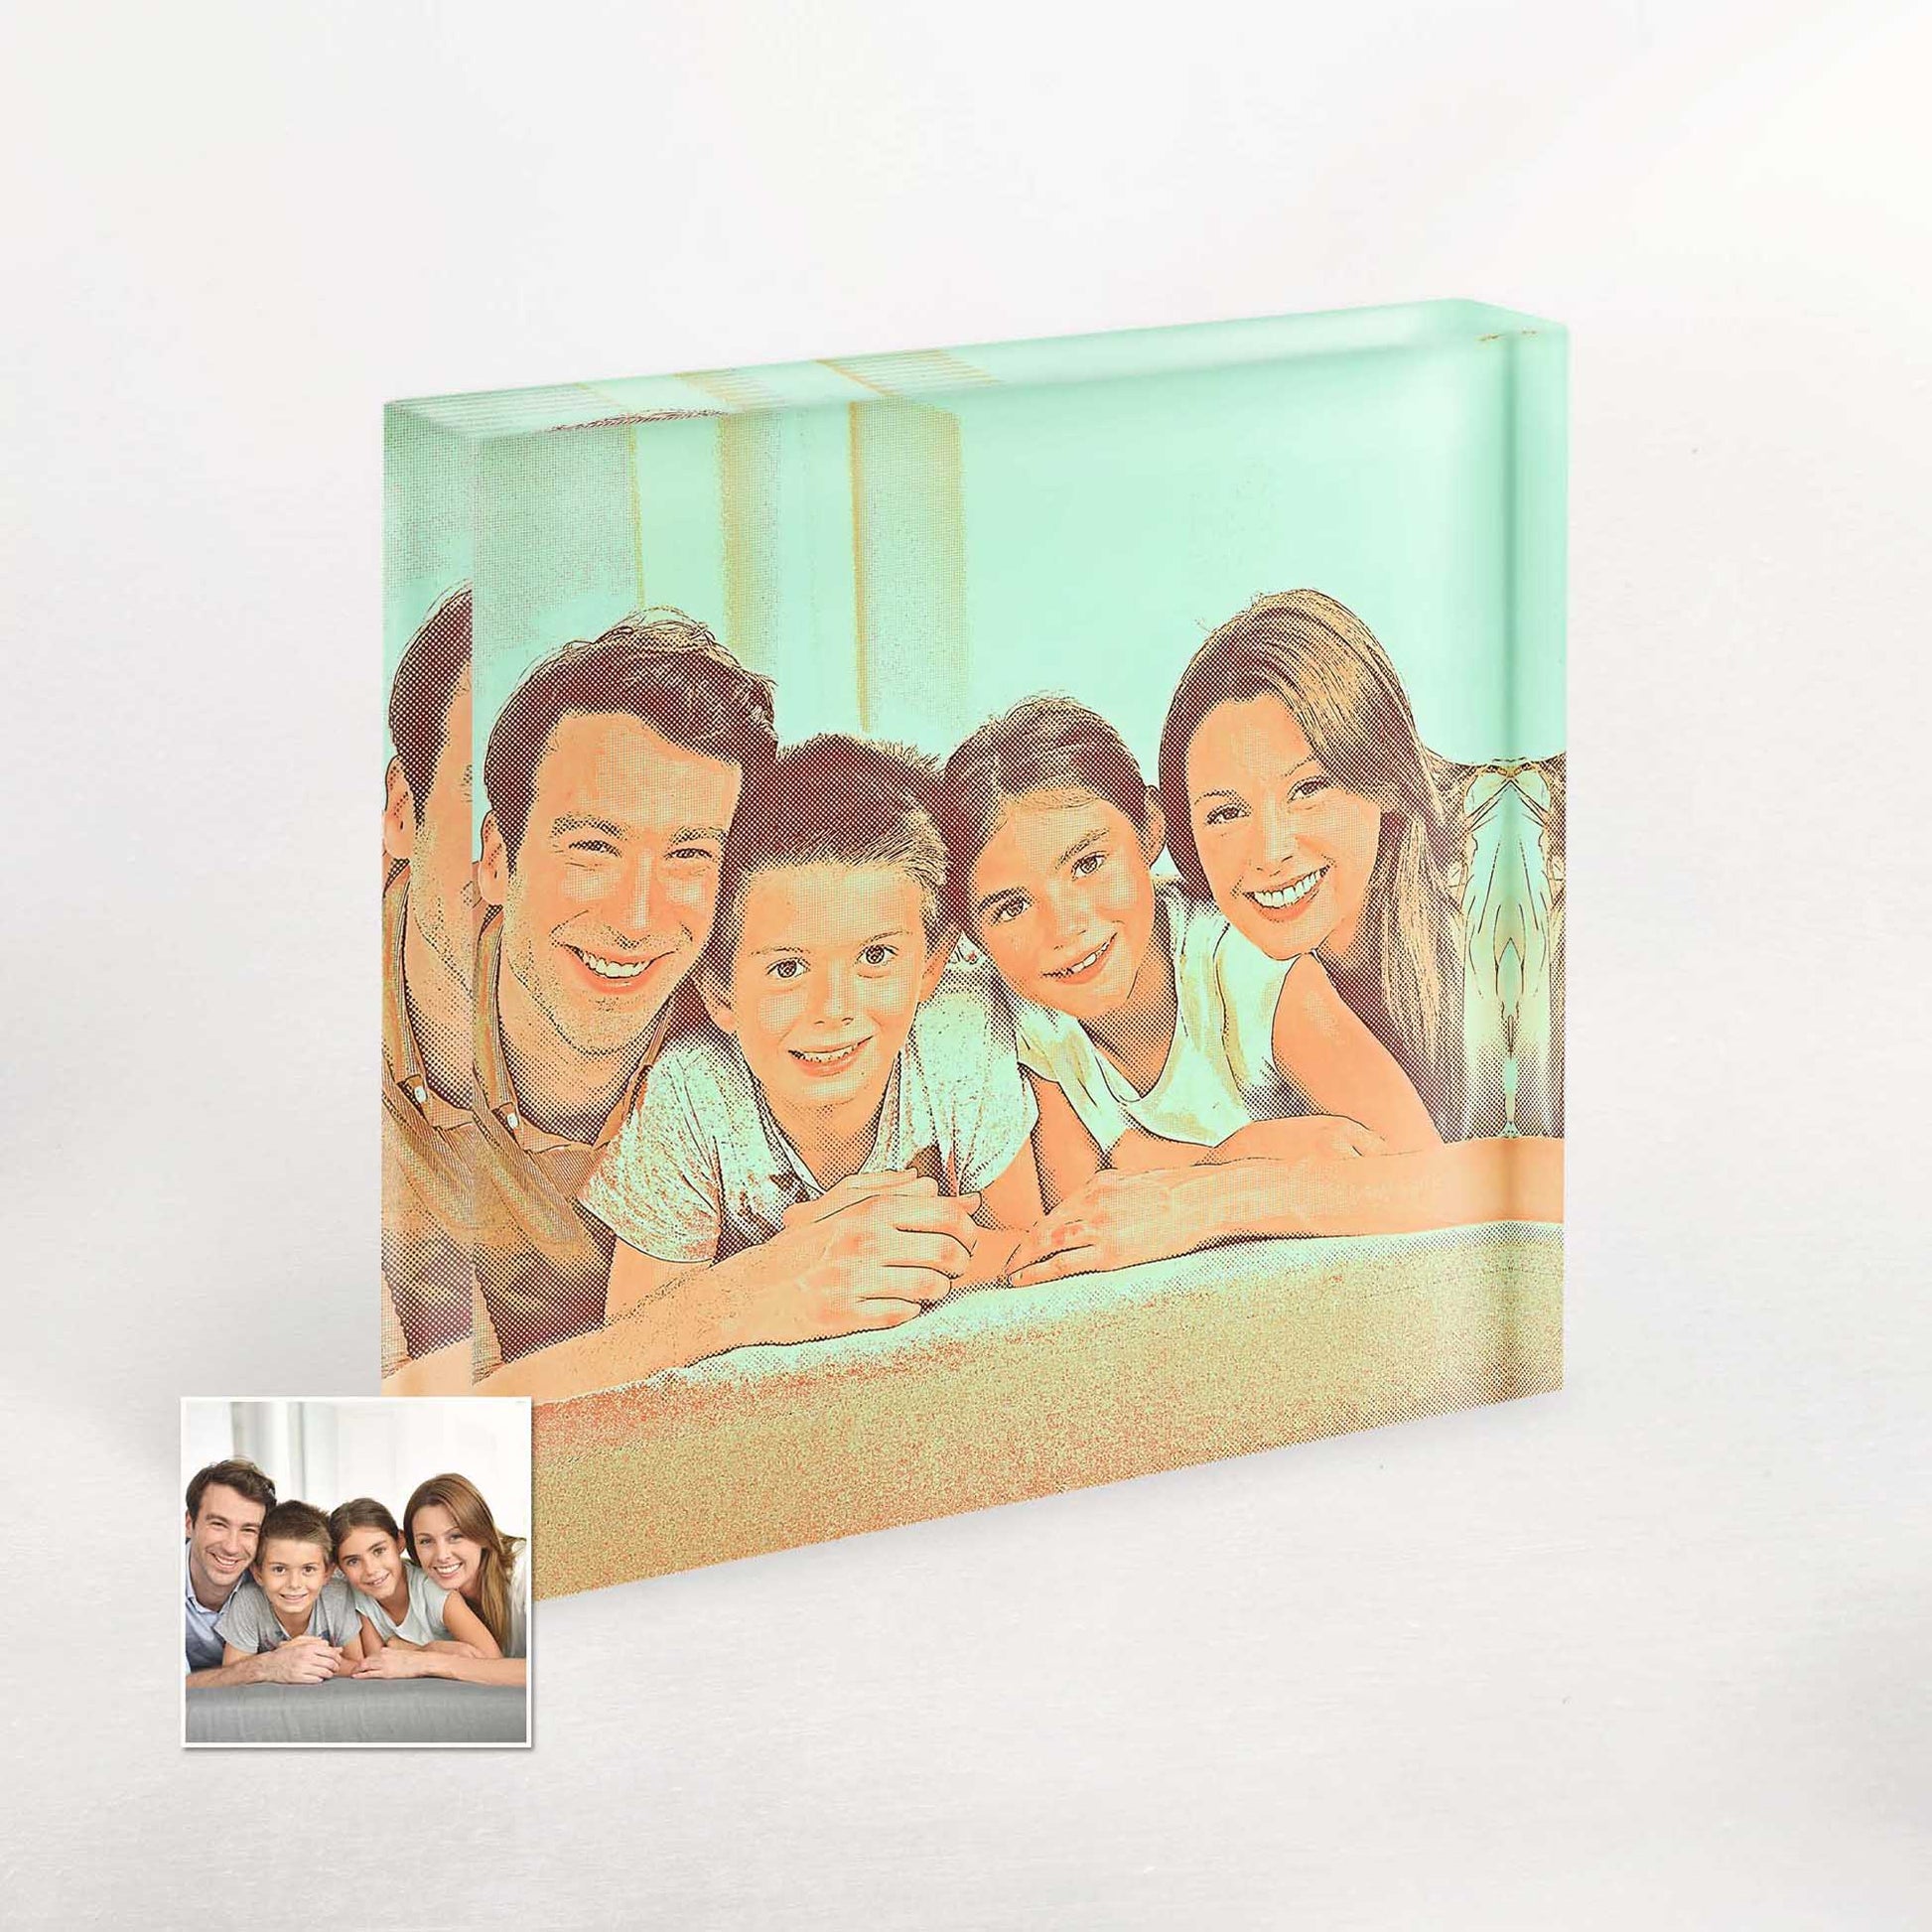 Elevate your home decor with our Personalised Orange and Green Tones Acrylic Block Photo. Its exciting and cool design, reminiscent of a fun and fresh natural look, brings a burst of energy and creativity 